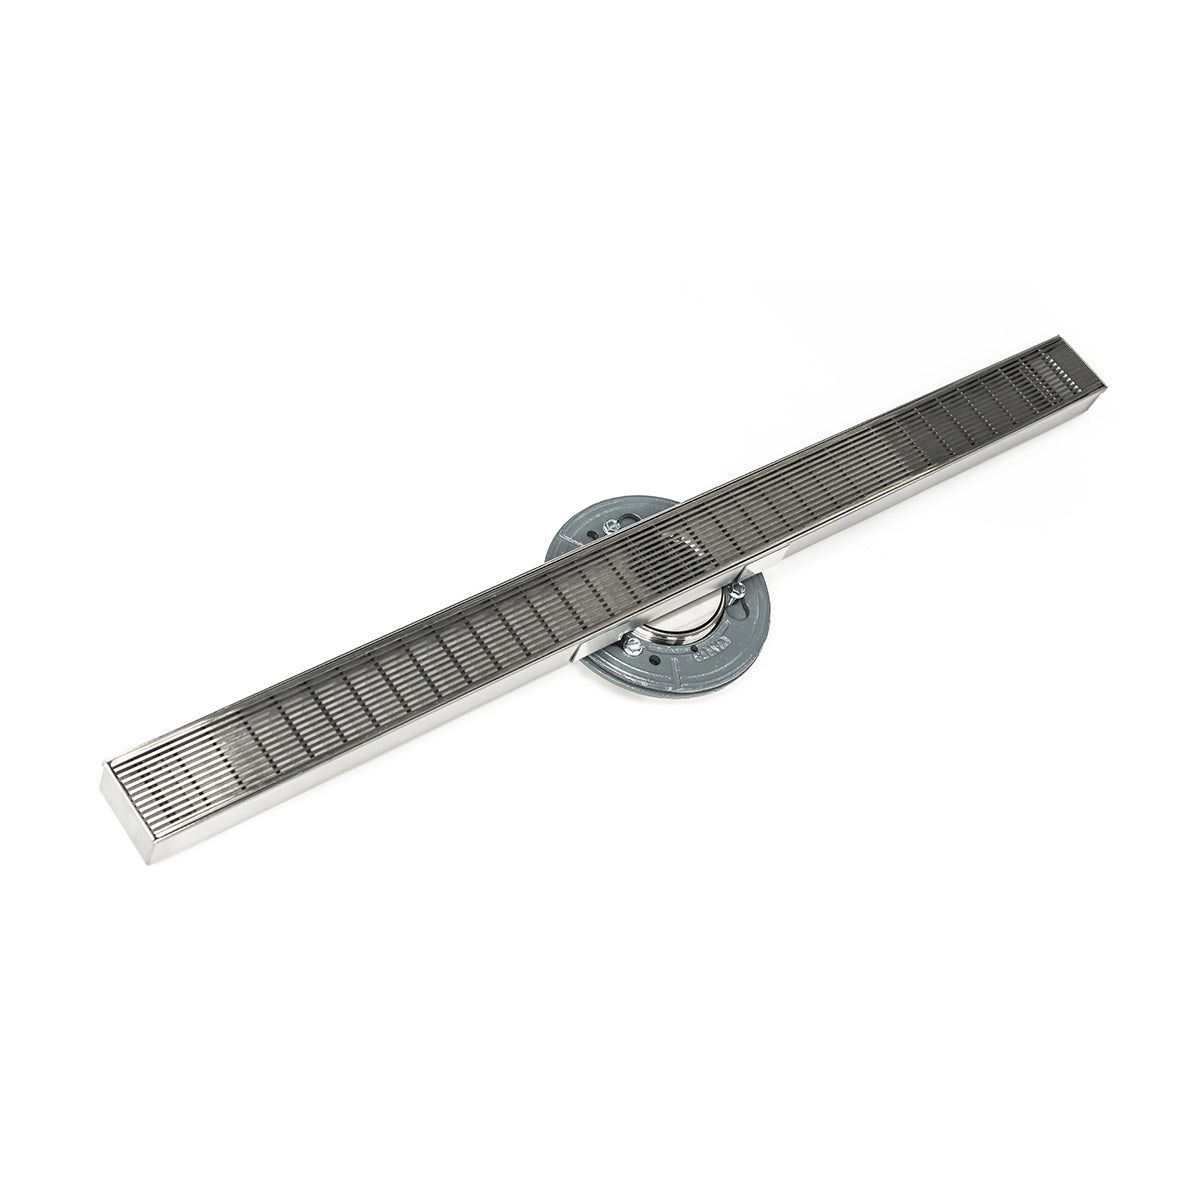 Infinity Drain 48" S-Stainless Steel Series High Flow Site Sizable Linear Drain Kit with 2 1/2" Wedge Wire Grate with ABS Drain Body, 3" Outlet